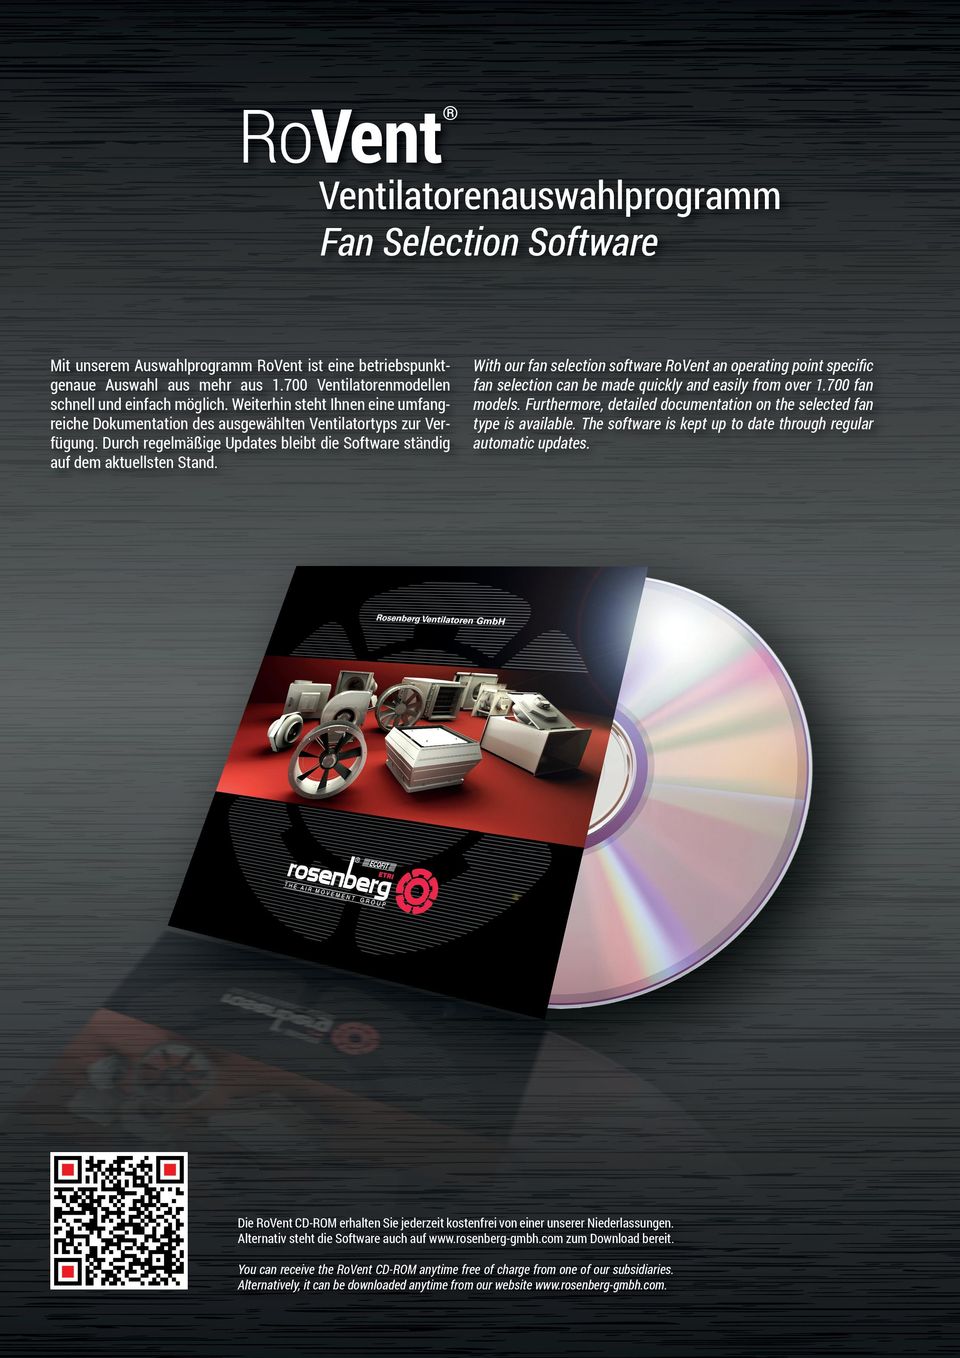 With our fan selection software RoVent an operating point specific fan selection can be made quickly and easily from over 1.7 fan models.